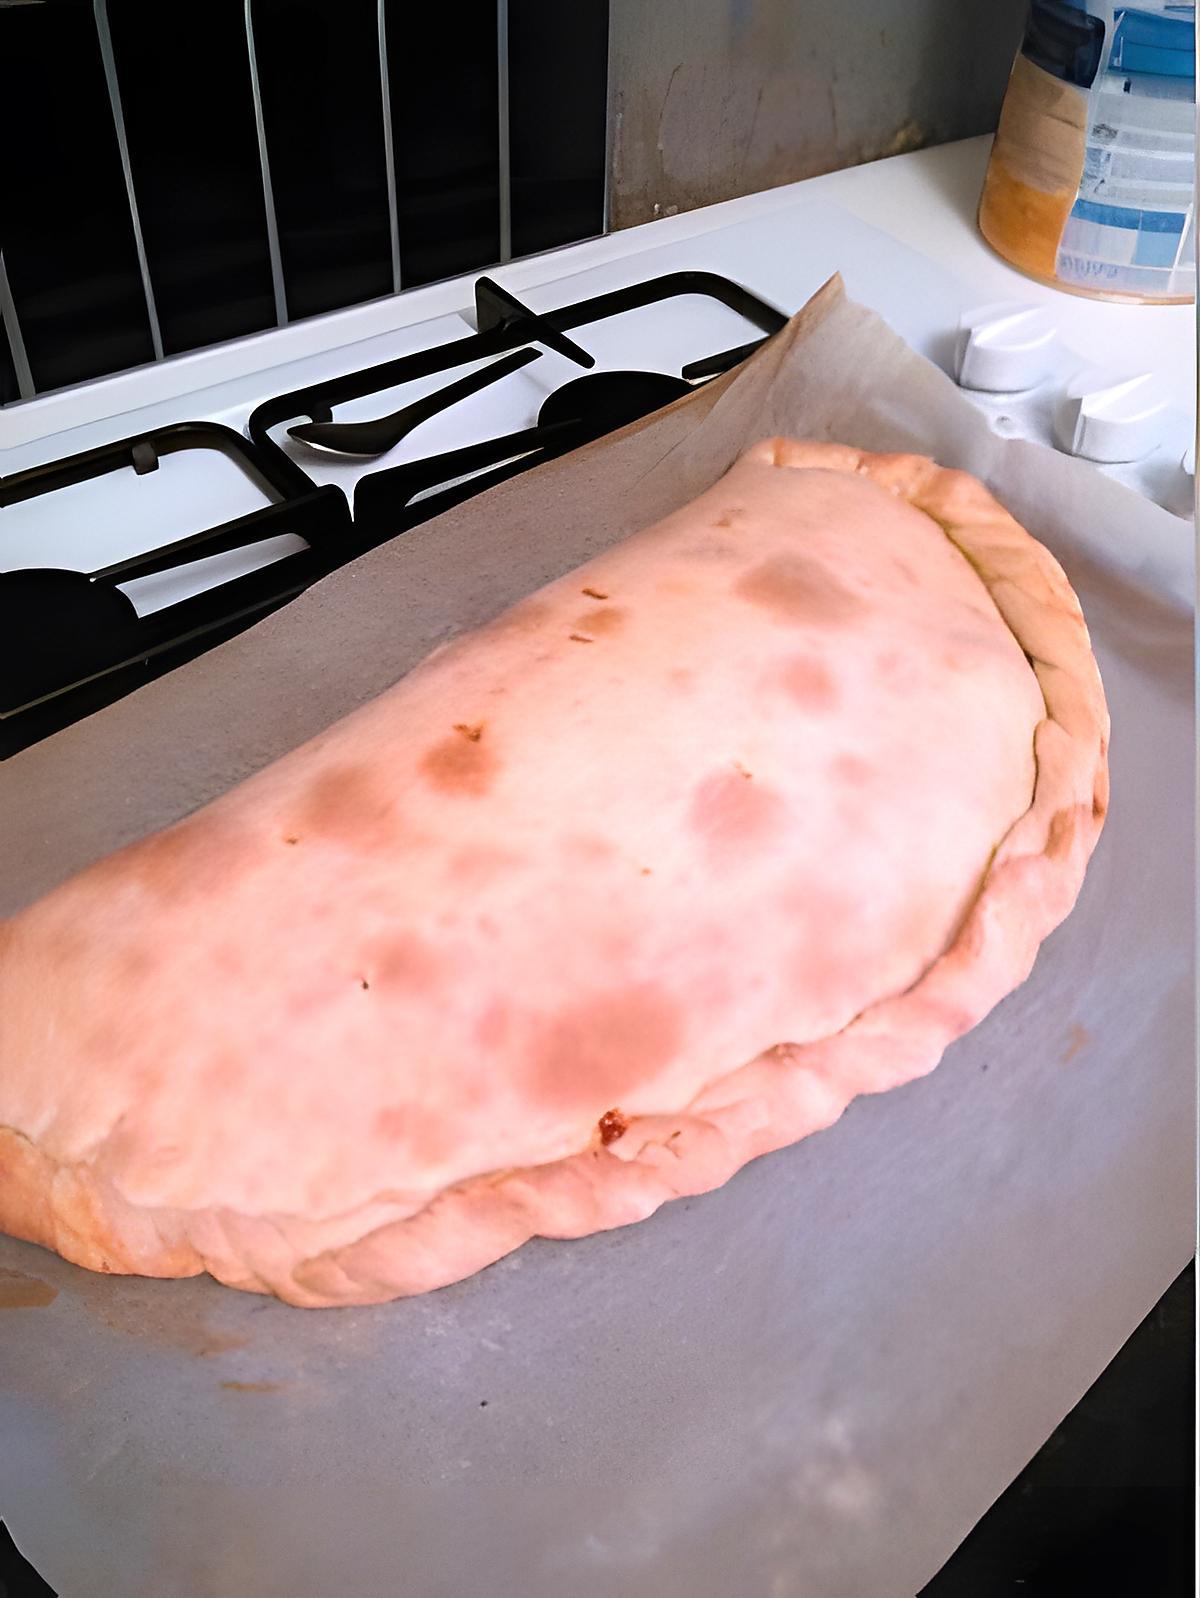 recette Calzone